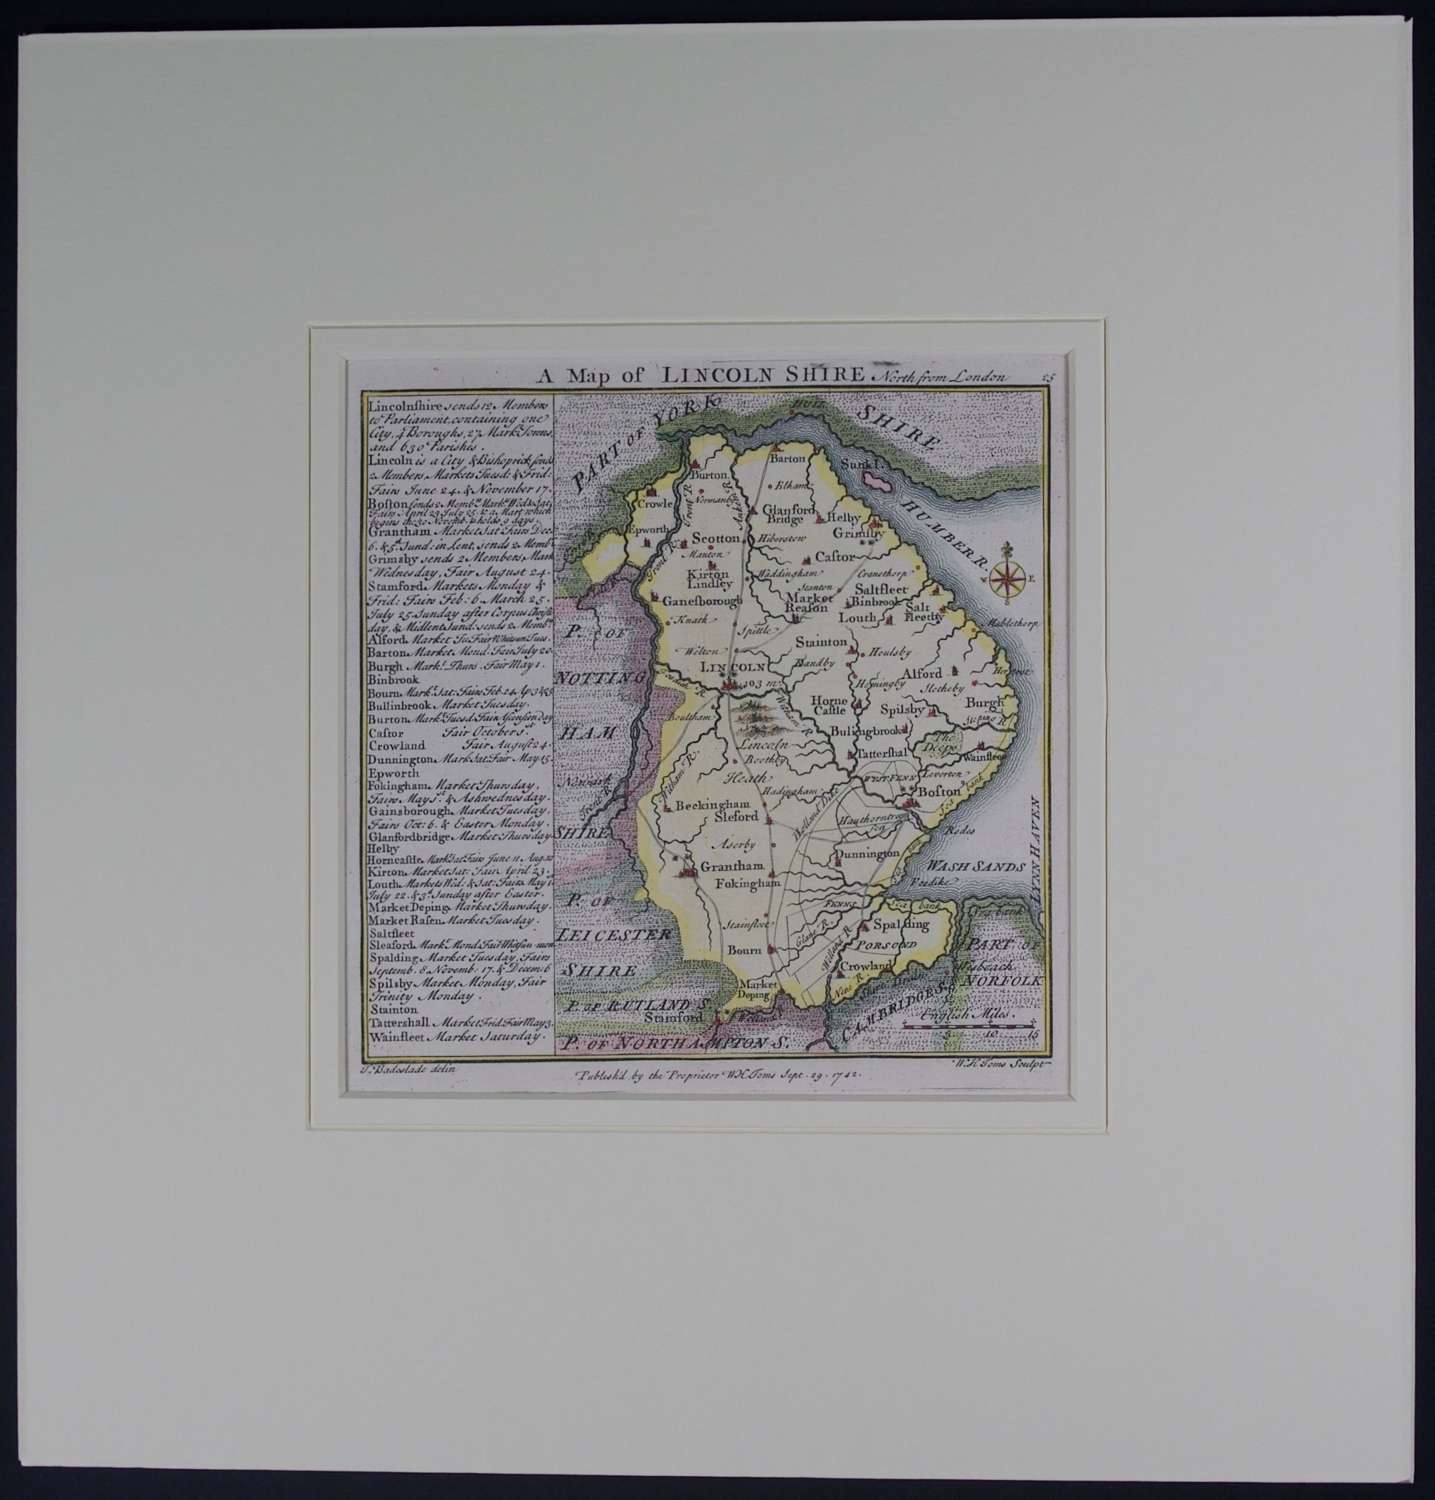 A Map of   Lincolnshire by Thomas badeslade